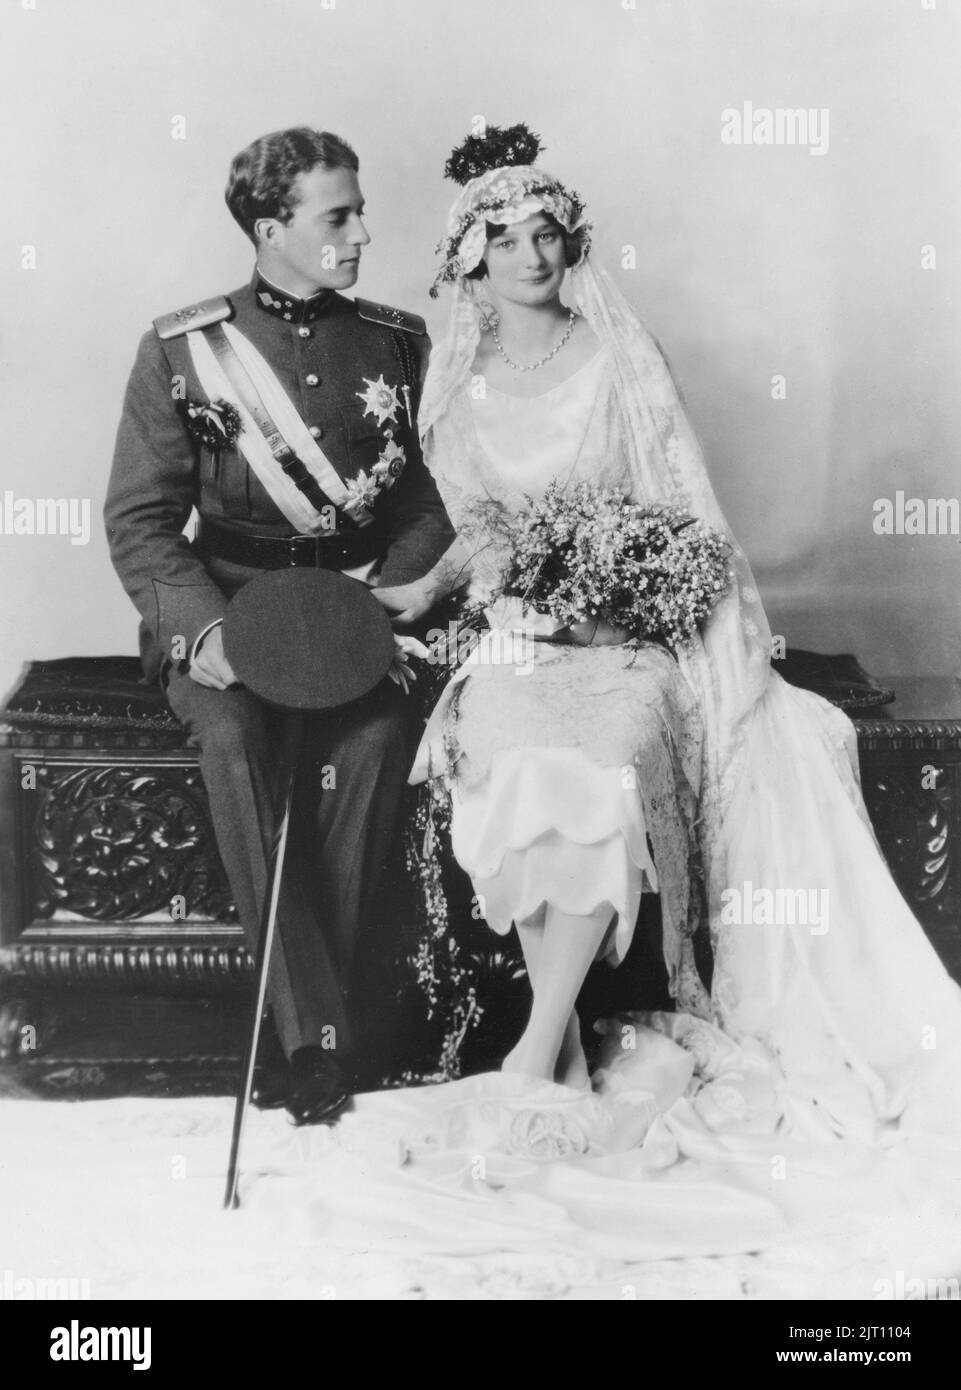 Princess Astrid of Sweden. 17 november 1905 - 29 august 1935. She was Queen of Belgium and the first wife of King Leopold III. Originally a princess of Sweden of the house of Bernadotte. During a car ride on august 29 1935 she was killed. Pictured here after their wedding 1926. She has a beautiful wedding dress and flowers in her lap with Leopold besider her in uniform. Stock Photo